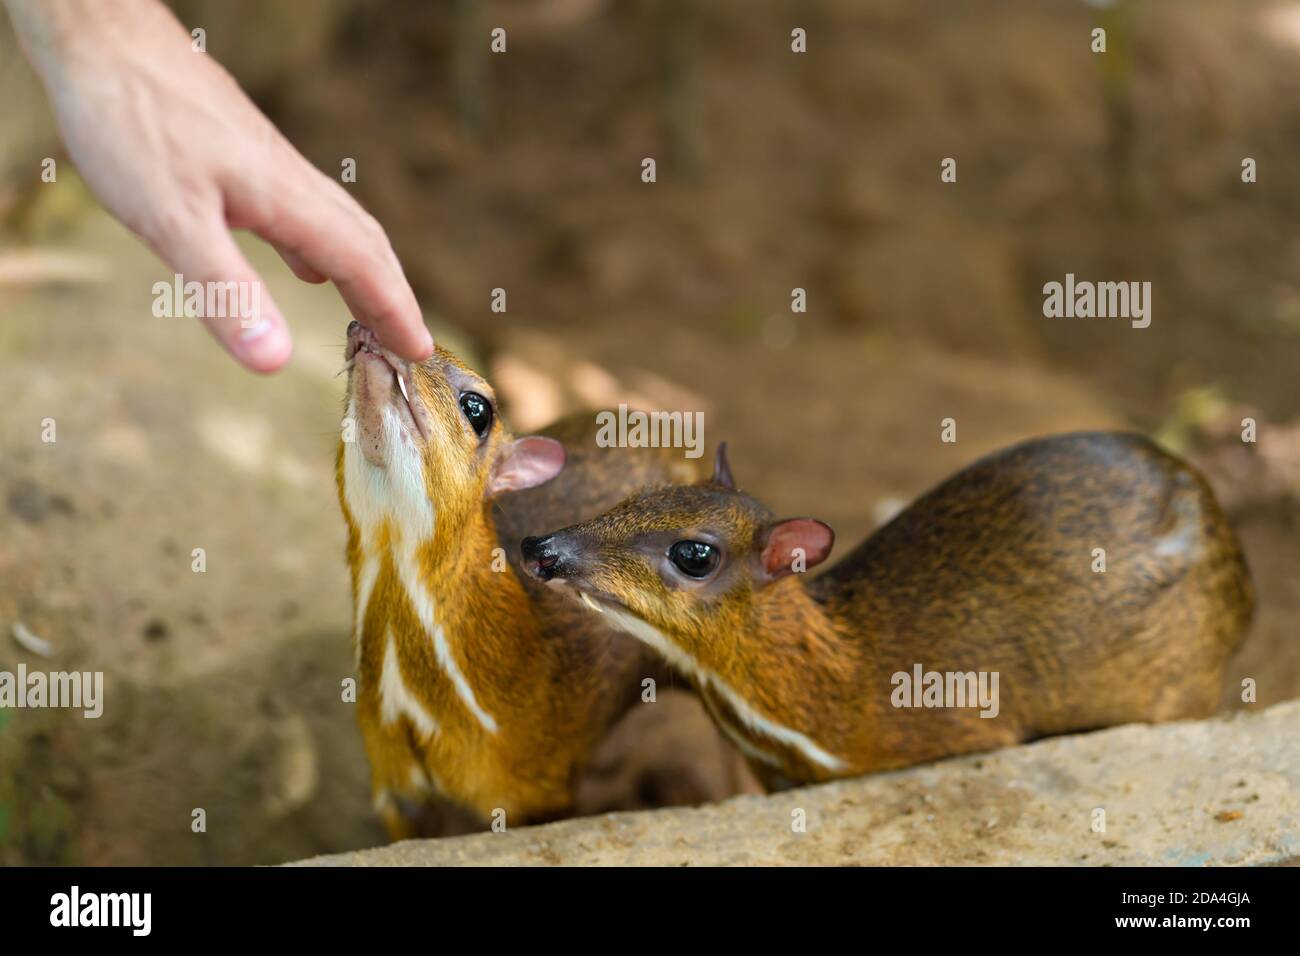 Kanchil Is An Amazing Cute Baby Deer From The Tropics The Mouse Deer Is One Of The Most Unusual Animals Cloven Hoofed Mouse Stock Photo Alamy